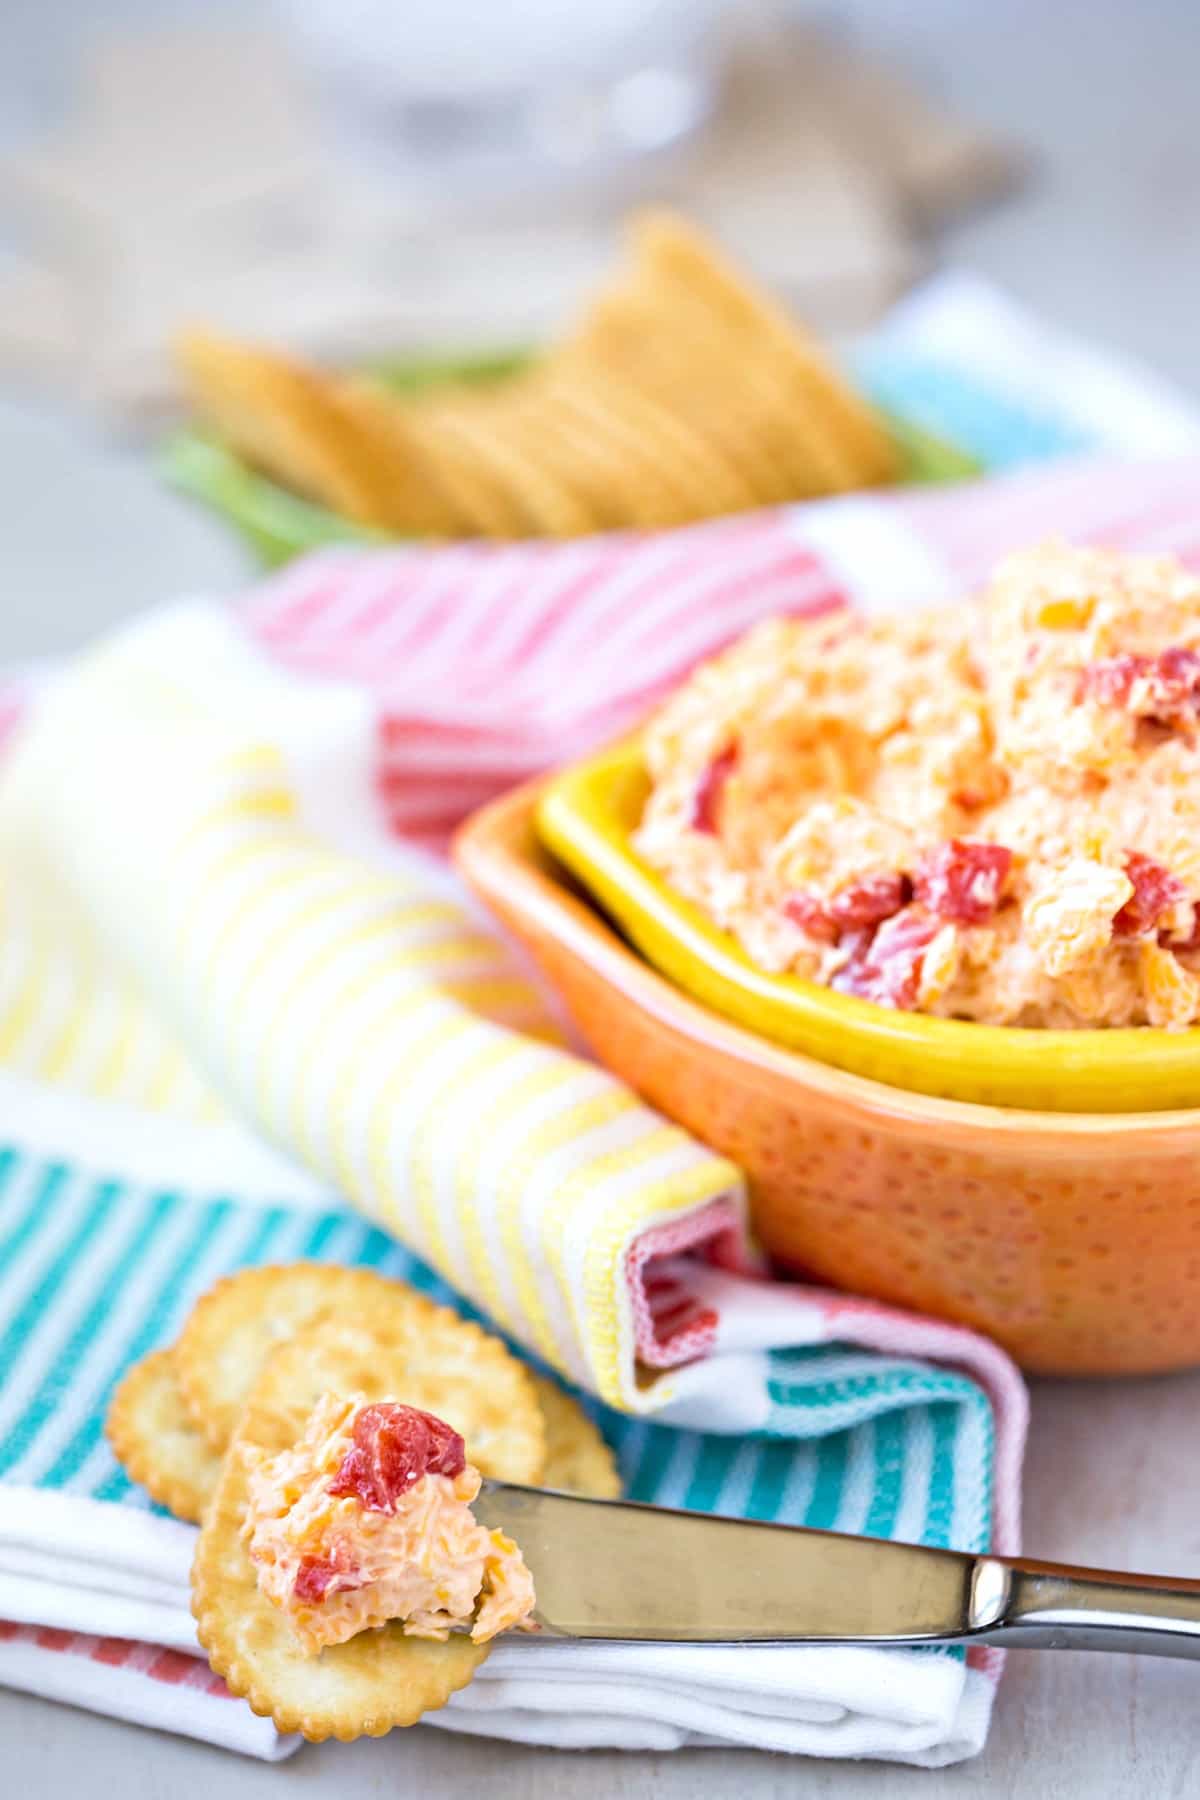 Pimento Cheese Dip on a knife spreading it onto a cracker